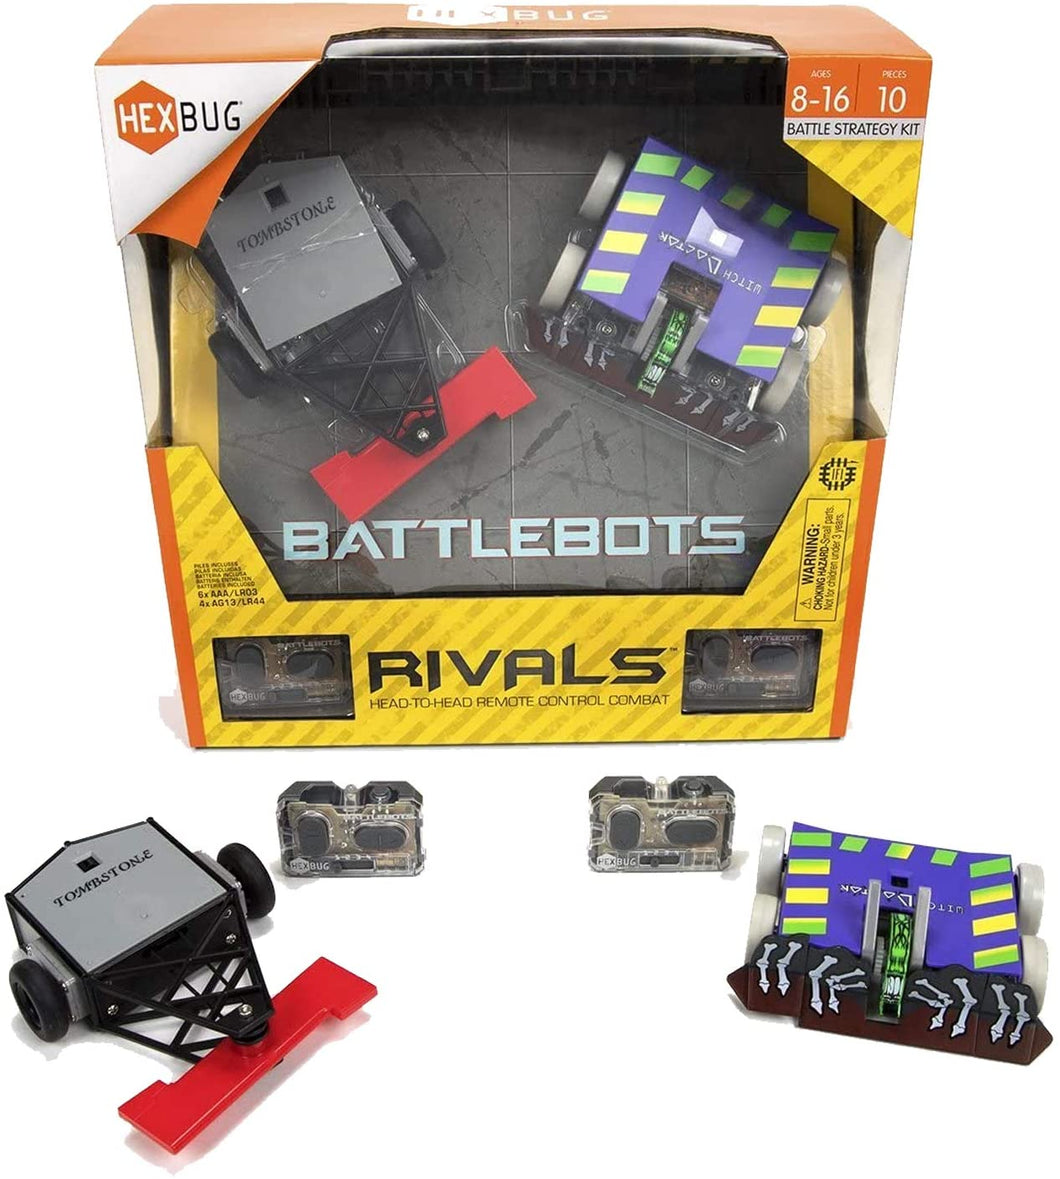 Hexbug Battle Bots Rivals (Witch Doctor & Tombstone)